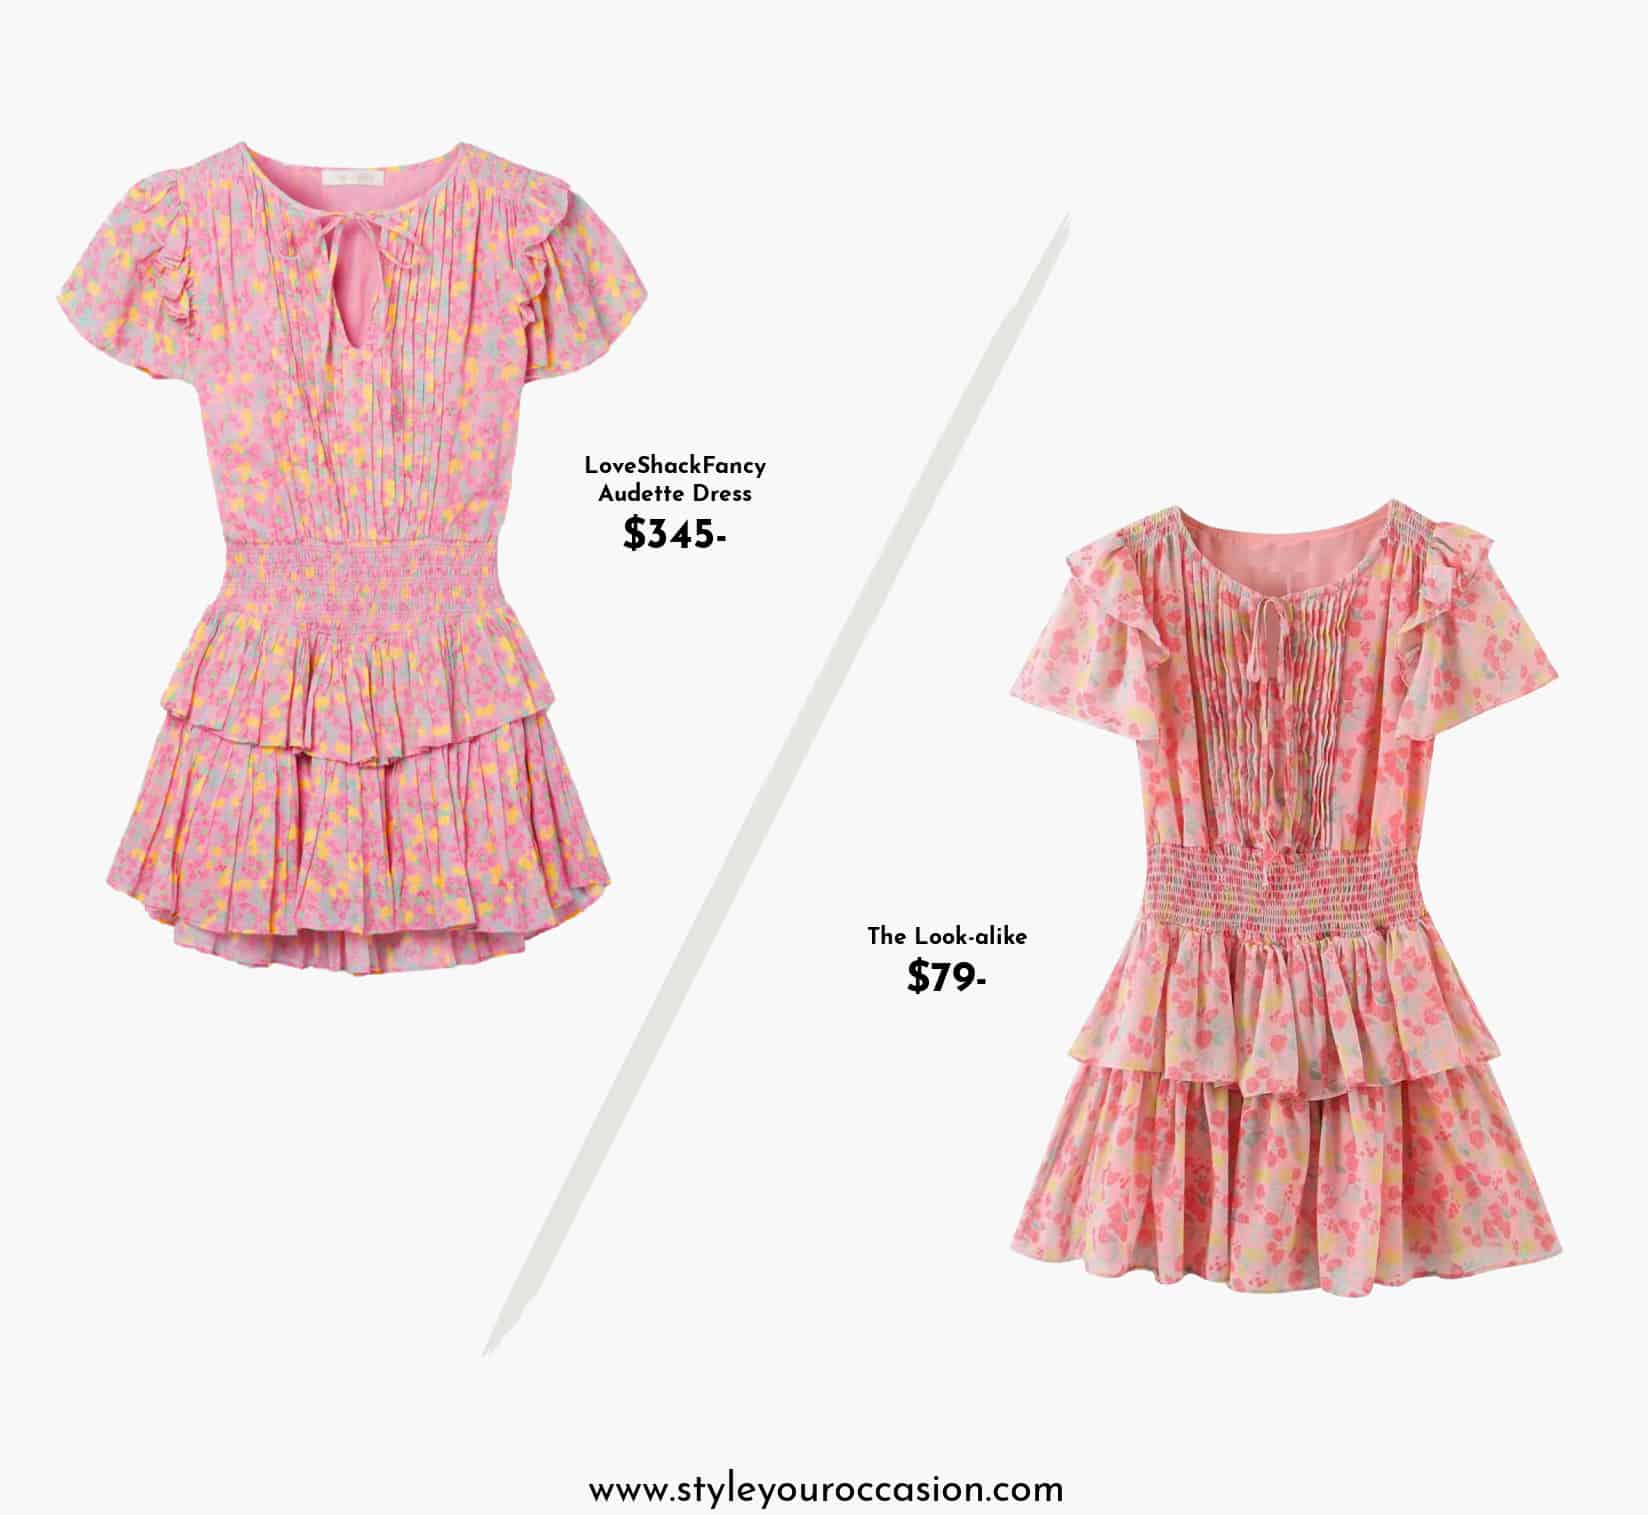 image of two pink mini floral dresses that look alike